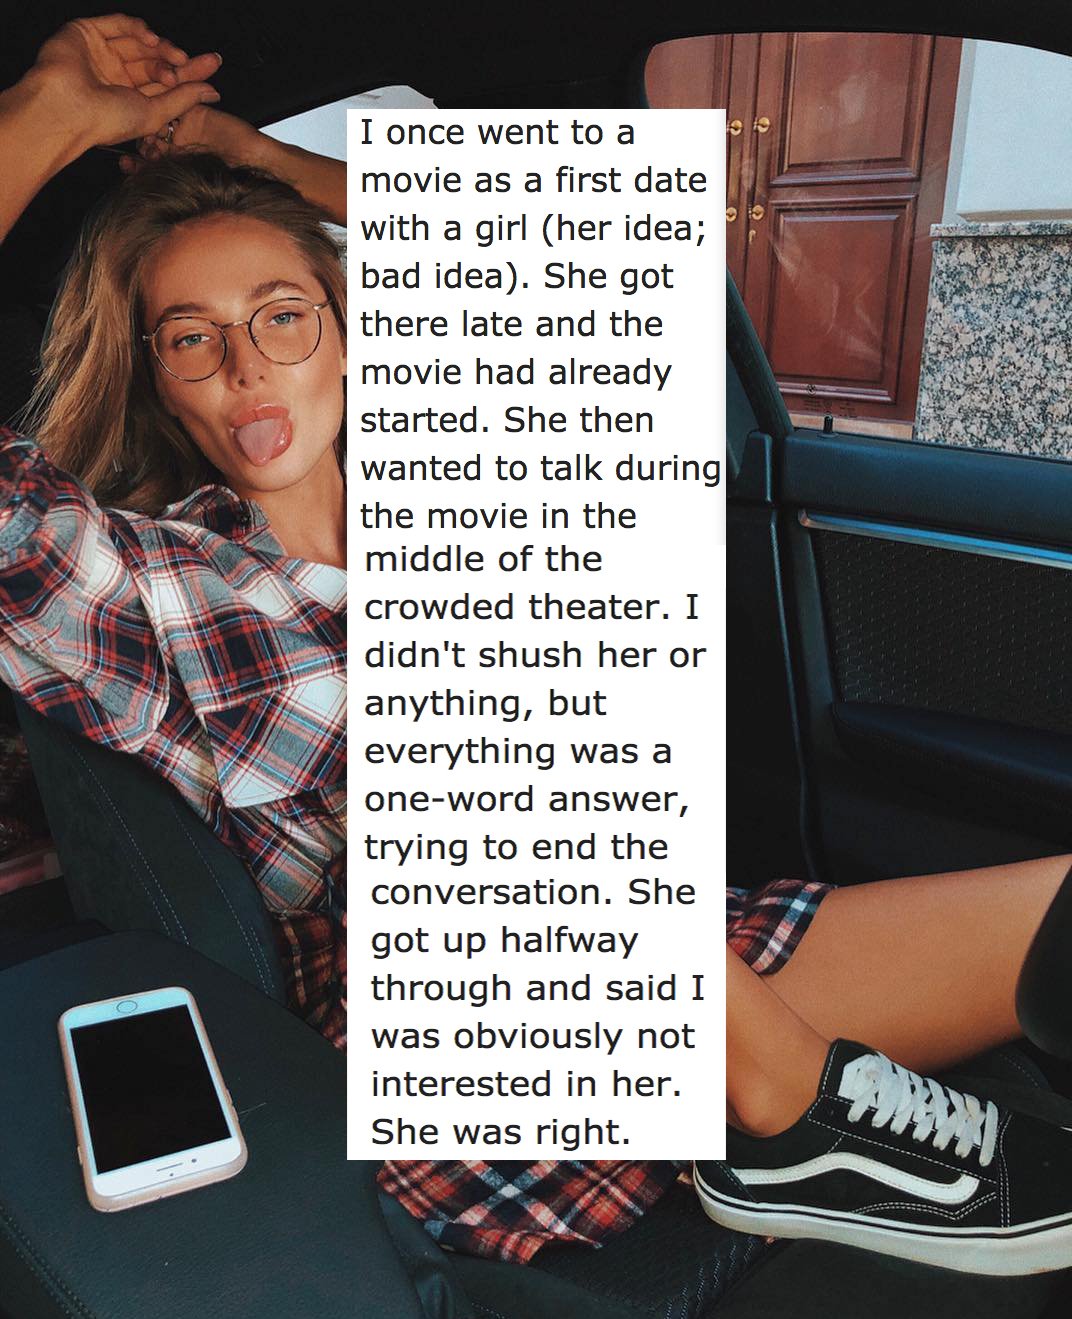 cool - I once went to a movie as a first date with a girl her idea; bad idea. She got there late and the movie had already started. She then wanted to talk during the movie in the middle of the crowded theater. I didn't shush her or anything, but everythi